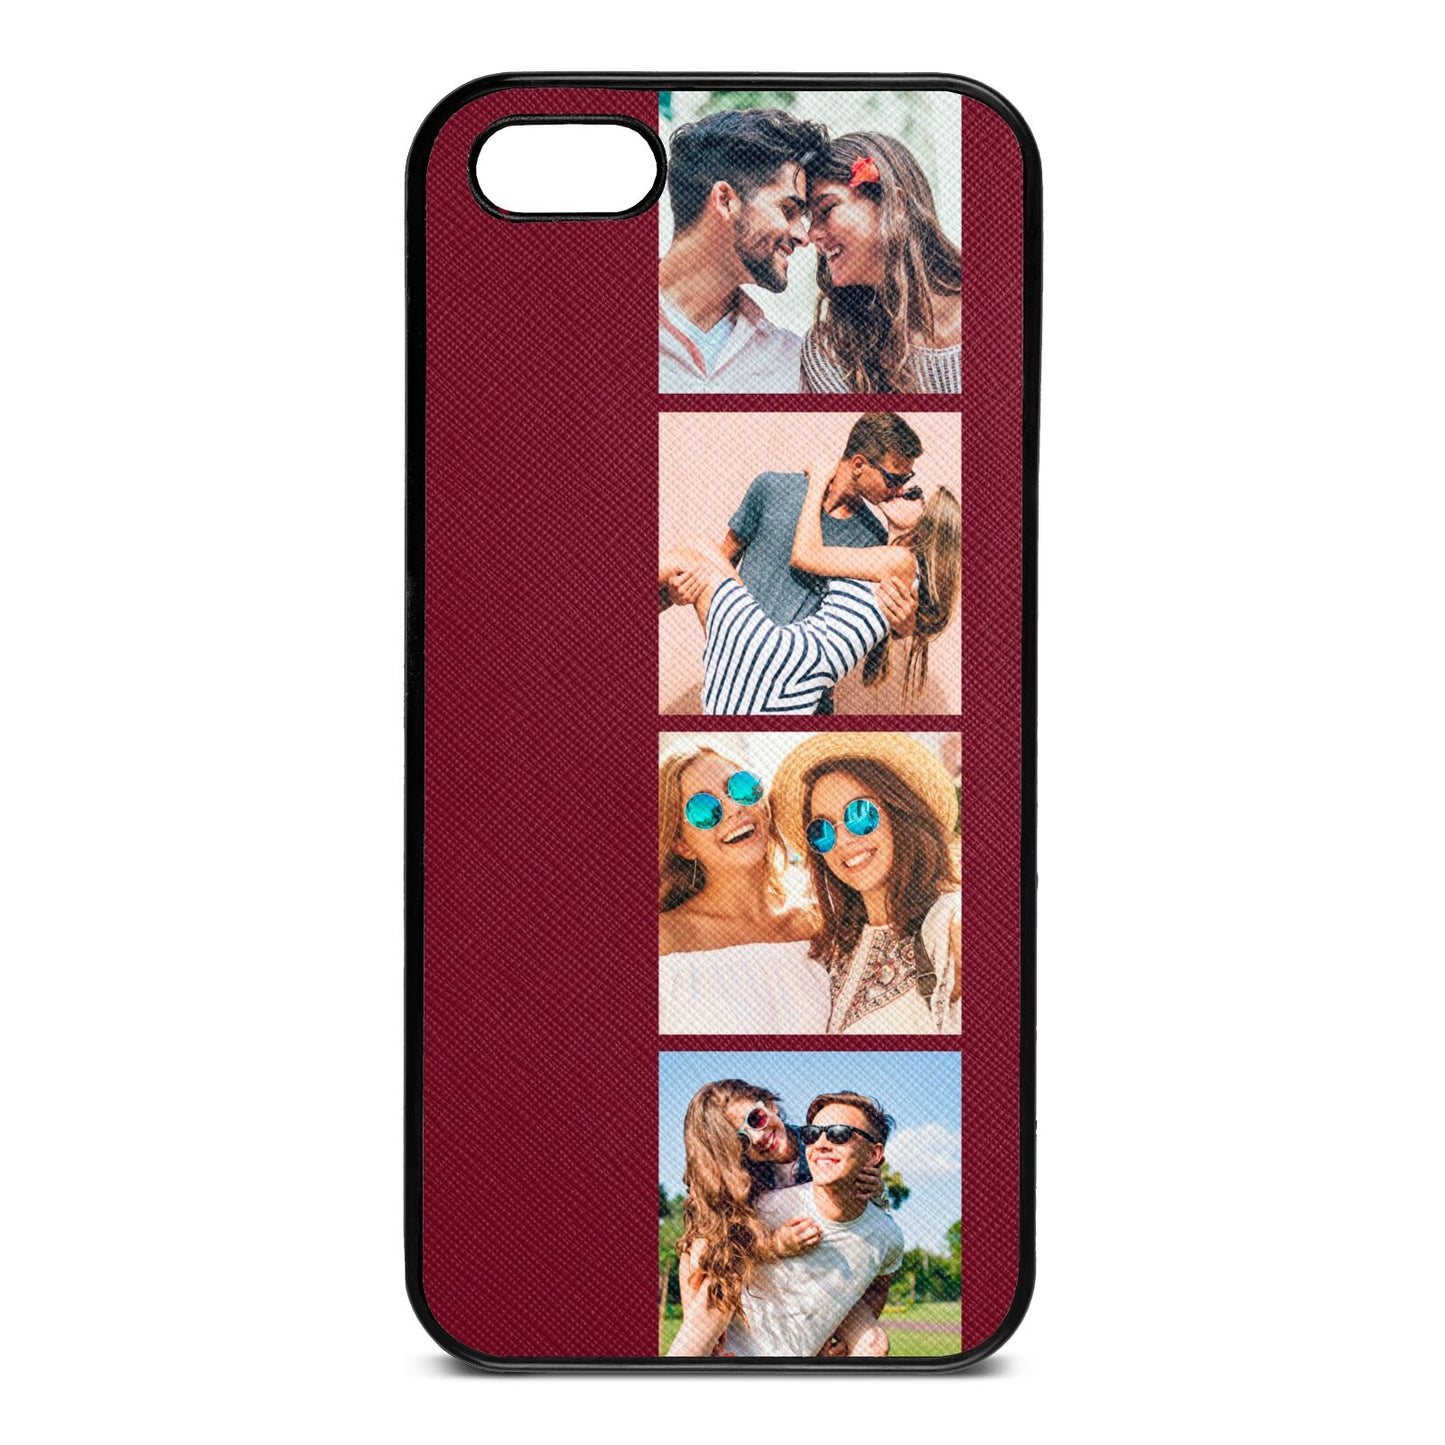 Photo Strip Montage Upload Wine Red Saffiano Leather iPhone 5 Case